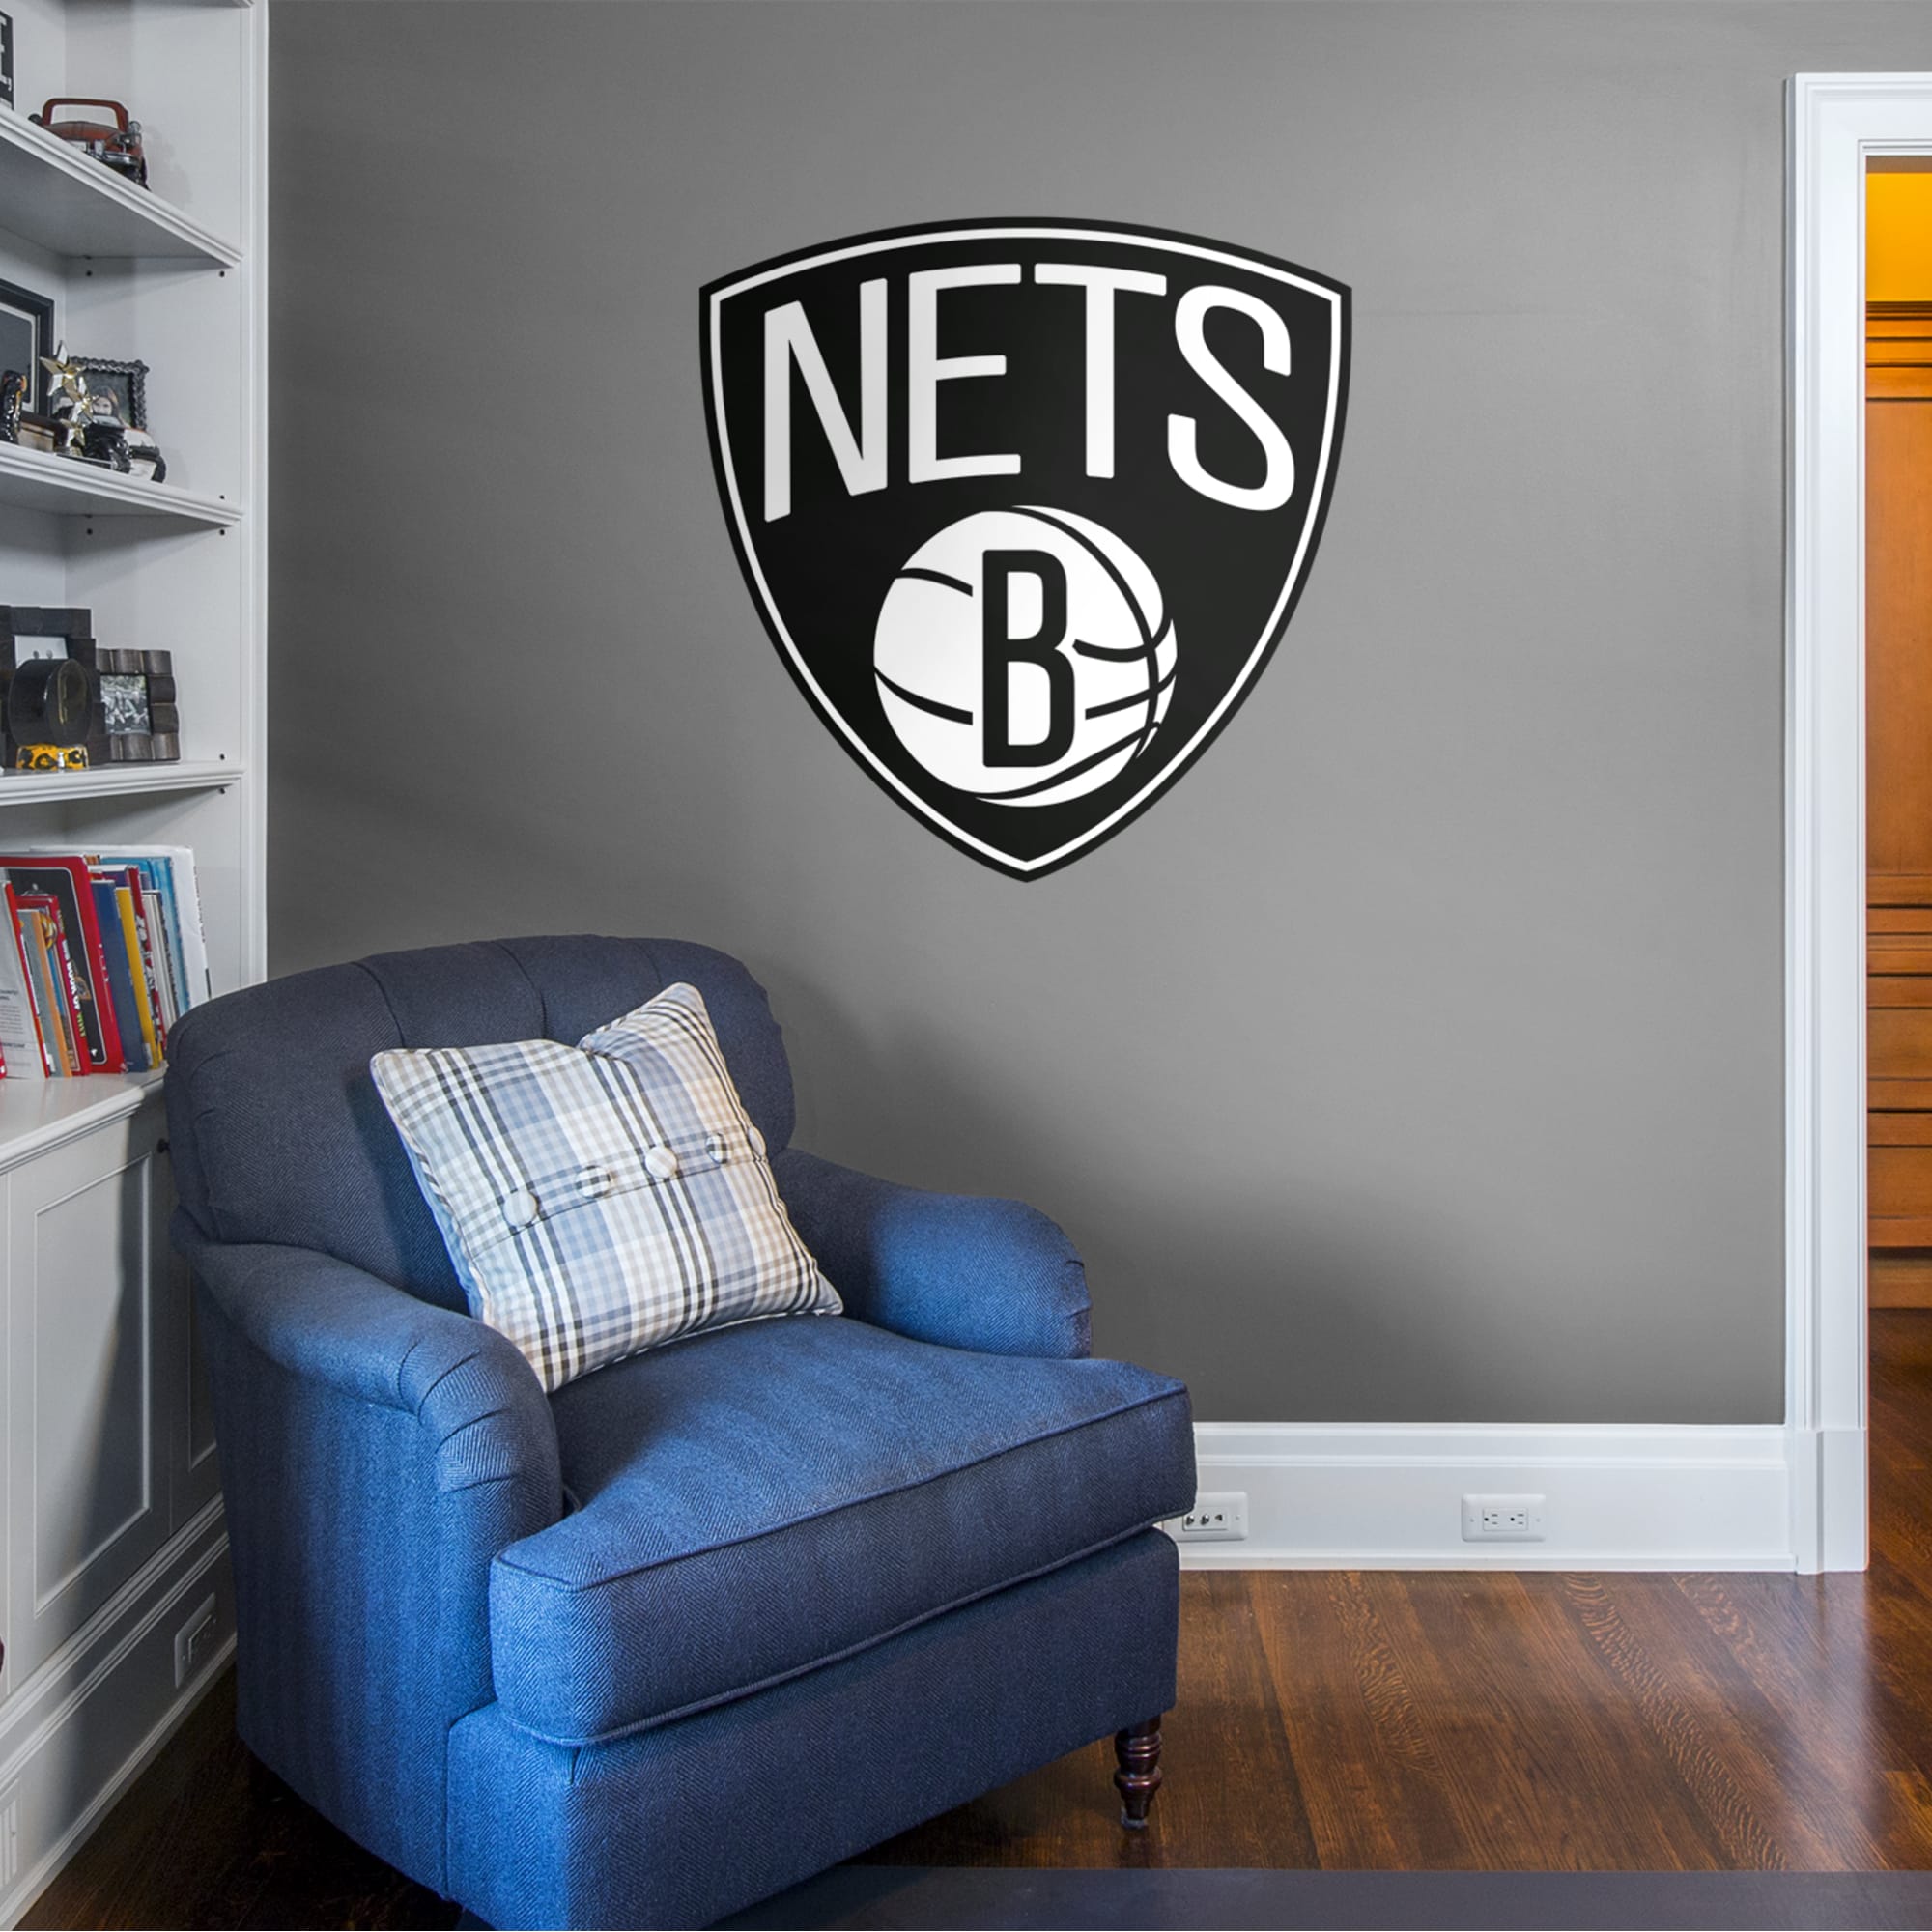 Brooklyn Nets: Logo - Officially Licensed NBA Removable Wall Decal 38.0"W x 39.0"H by Fathead | Vinyl